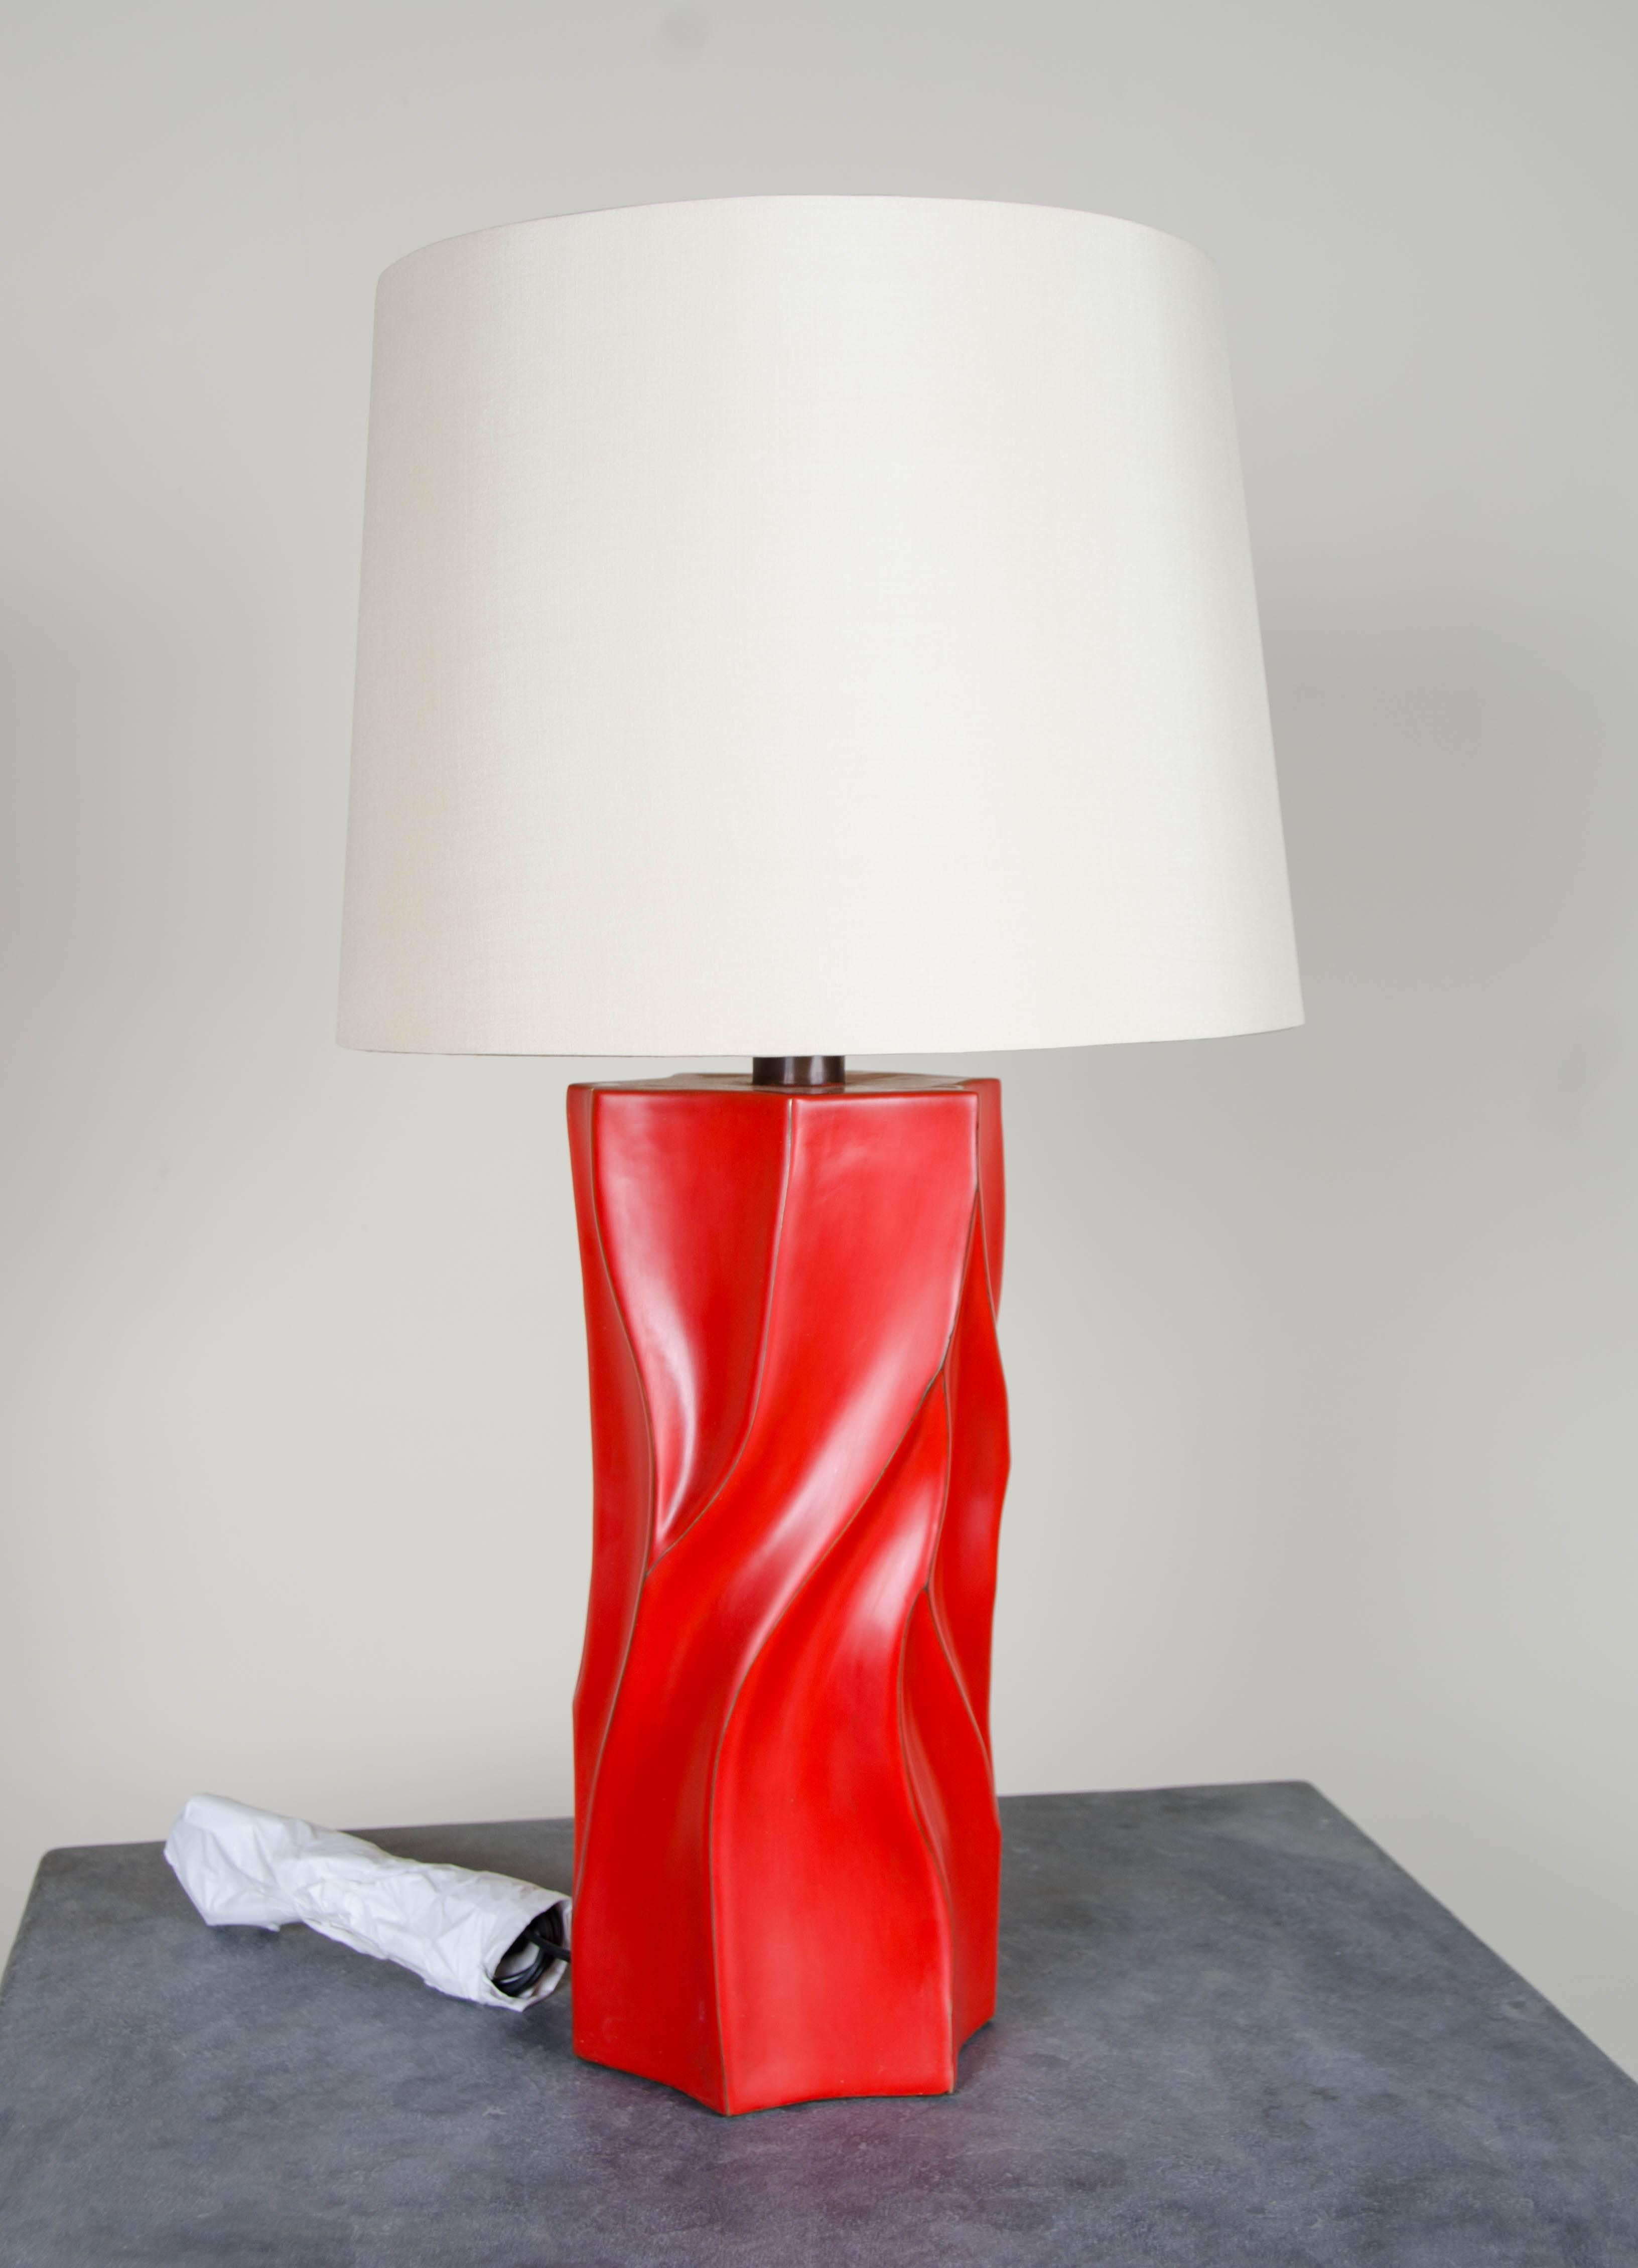 Tree trunk design table lamp
Red lacquer
Copper base
Hand repoussé
Silk shade
Limited edition

Lacquer is a technique that dates back to the Shang dynasty, circa 1600-1100 B.C. These pieces are made with at least 60 coats of organic lacquer. Each